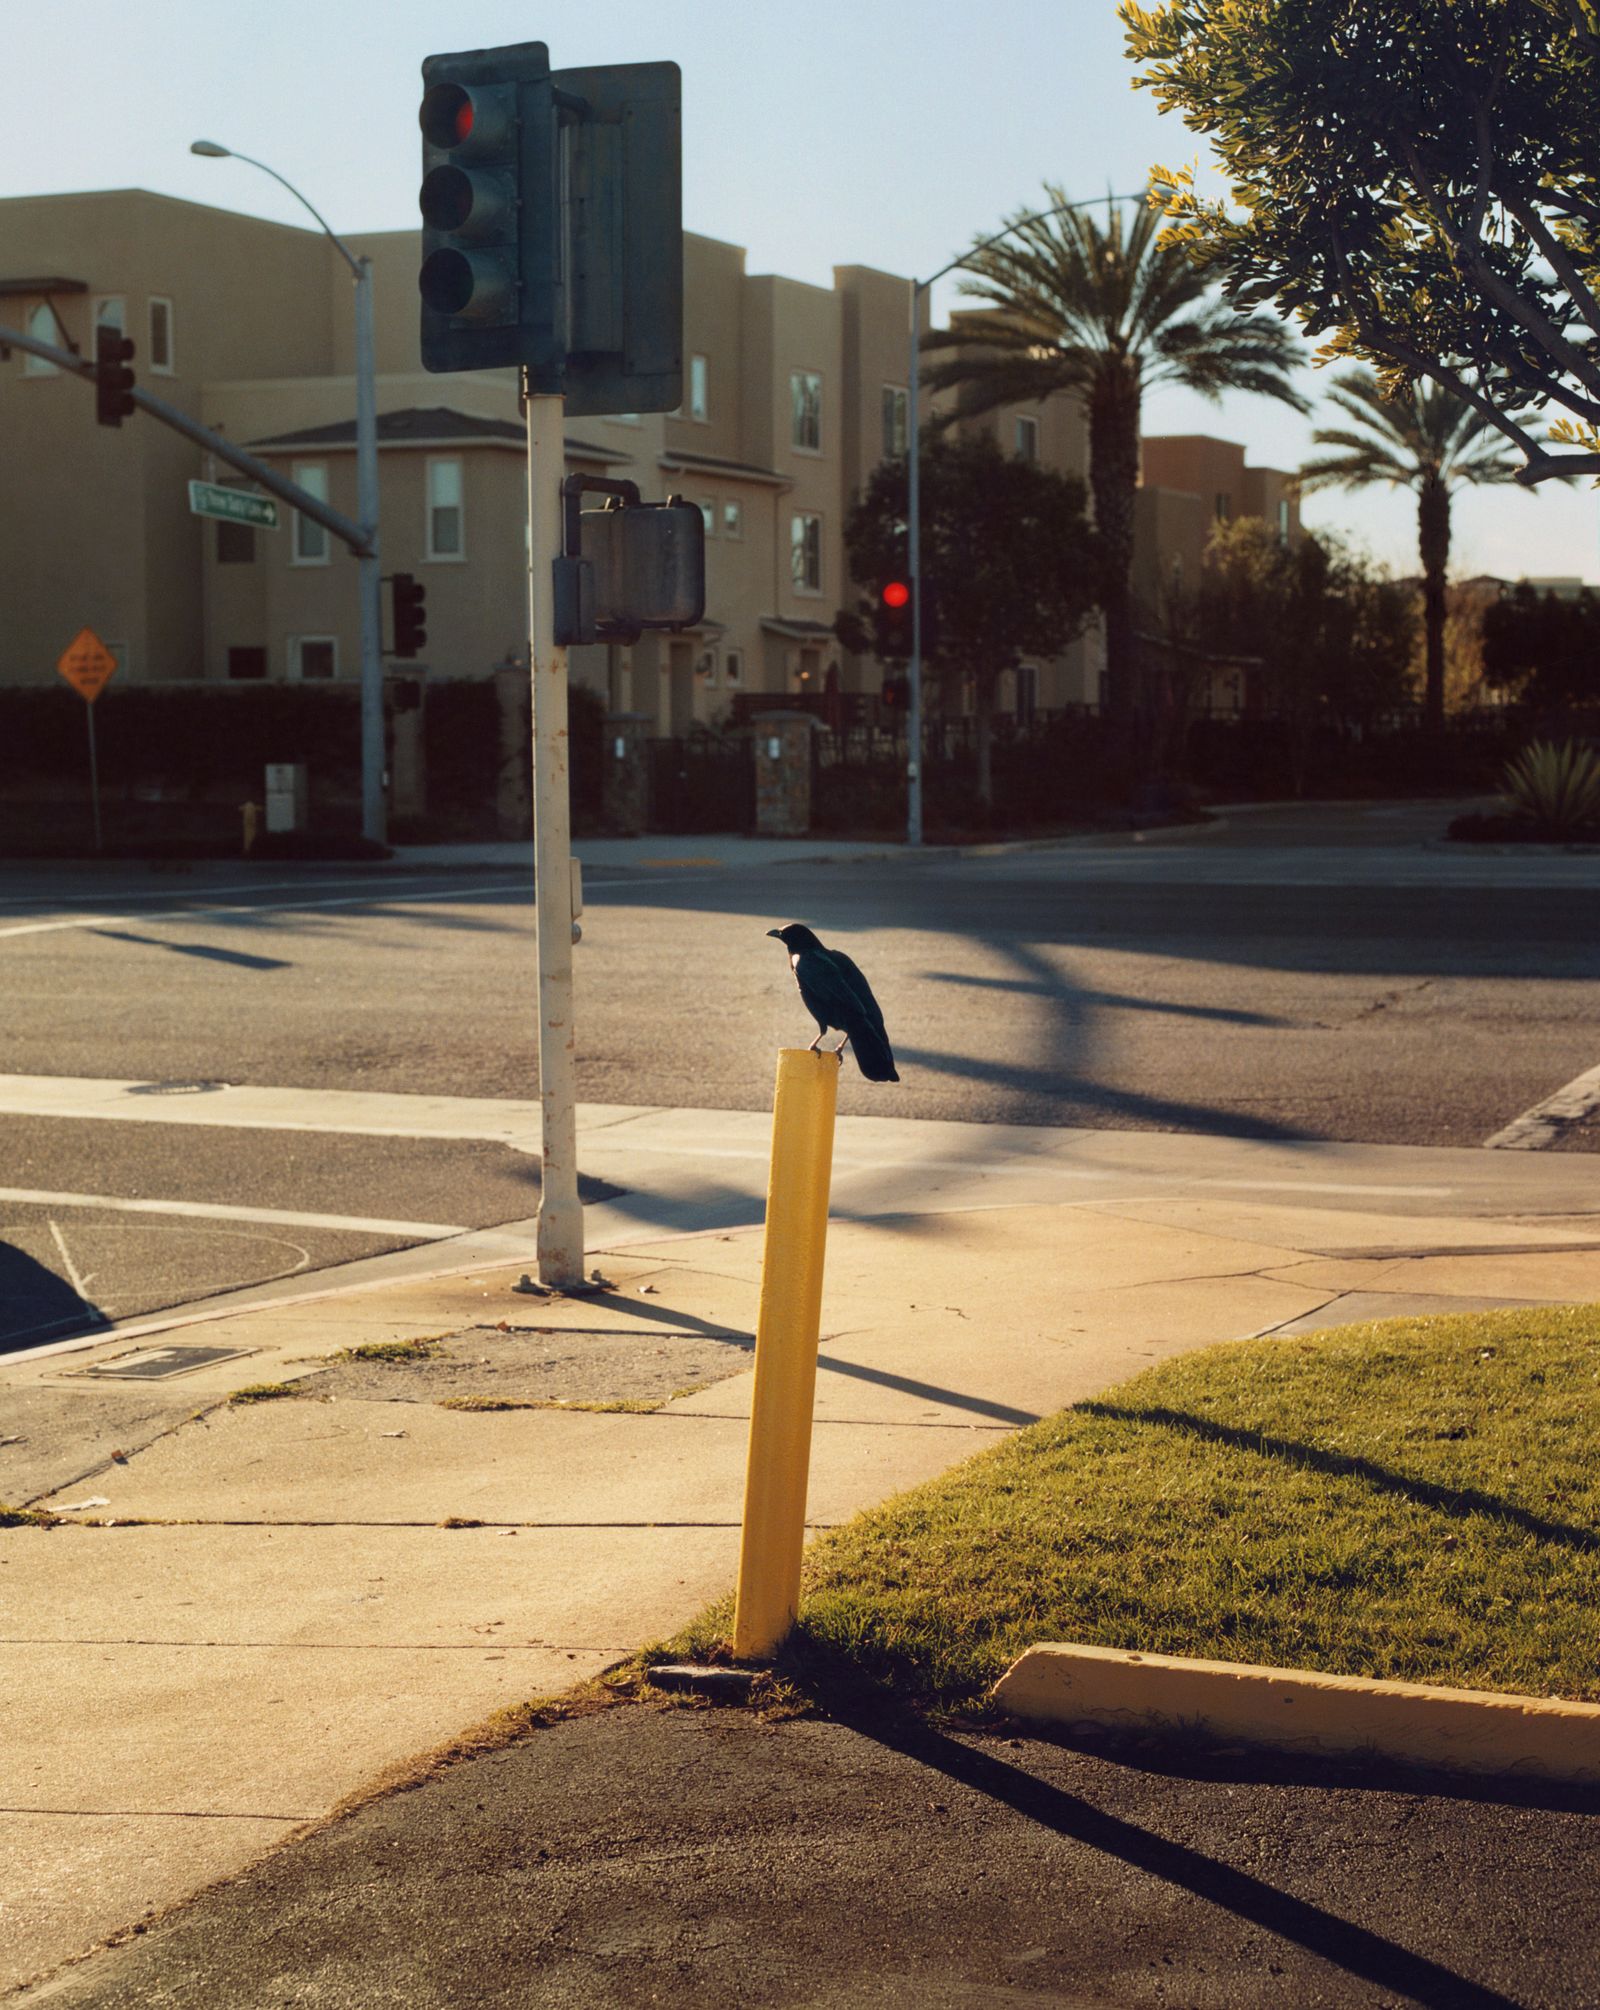 © Niall OBrien - Image from the 405 photography project